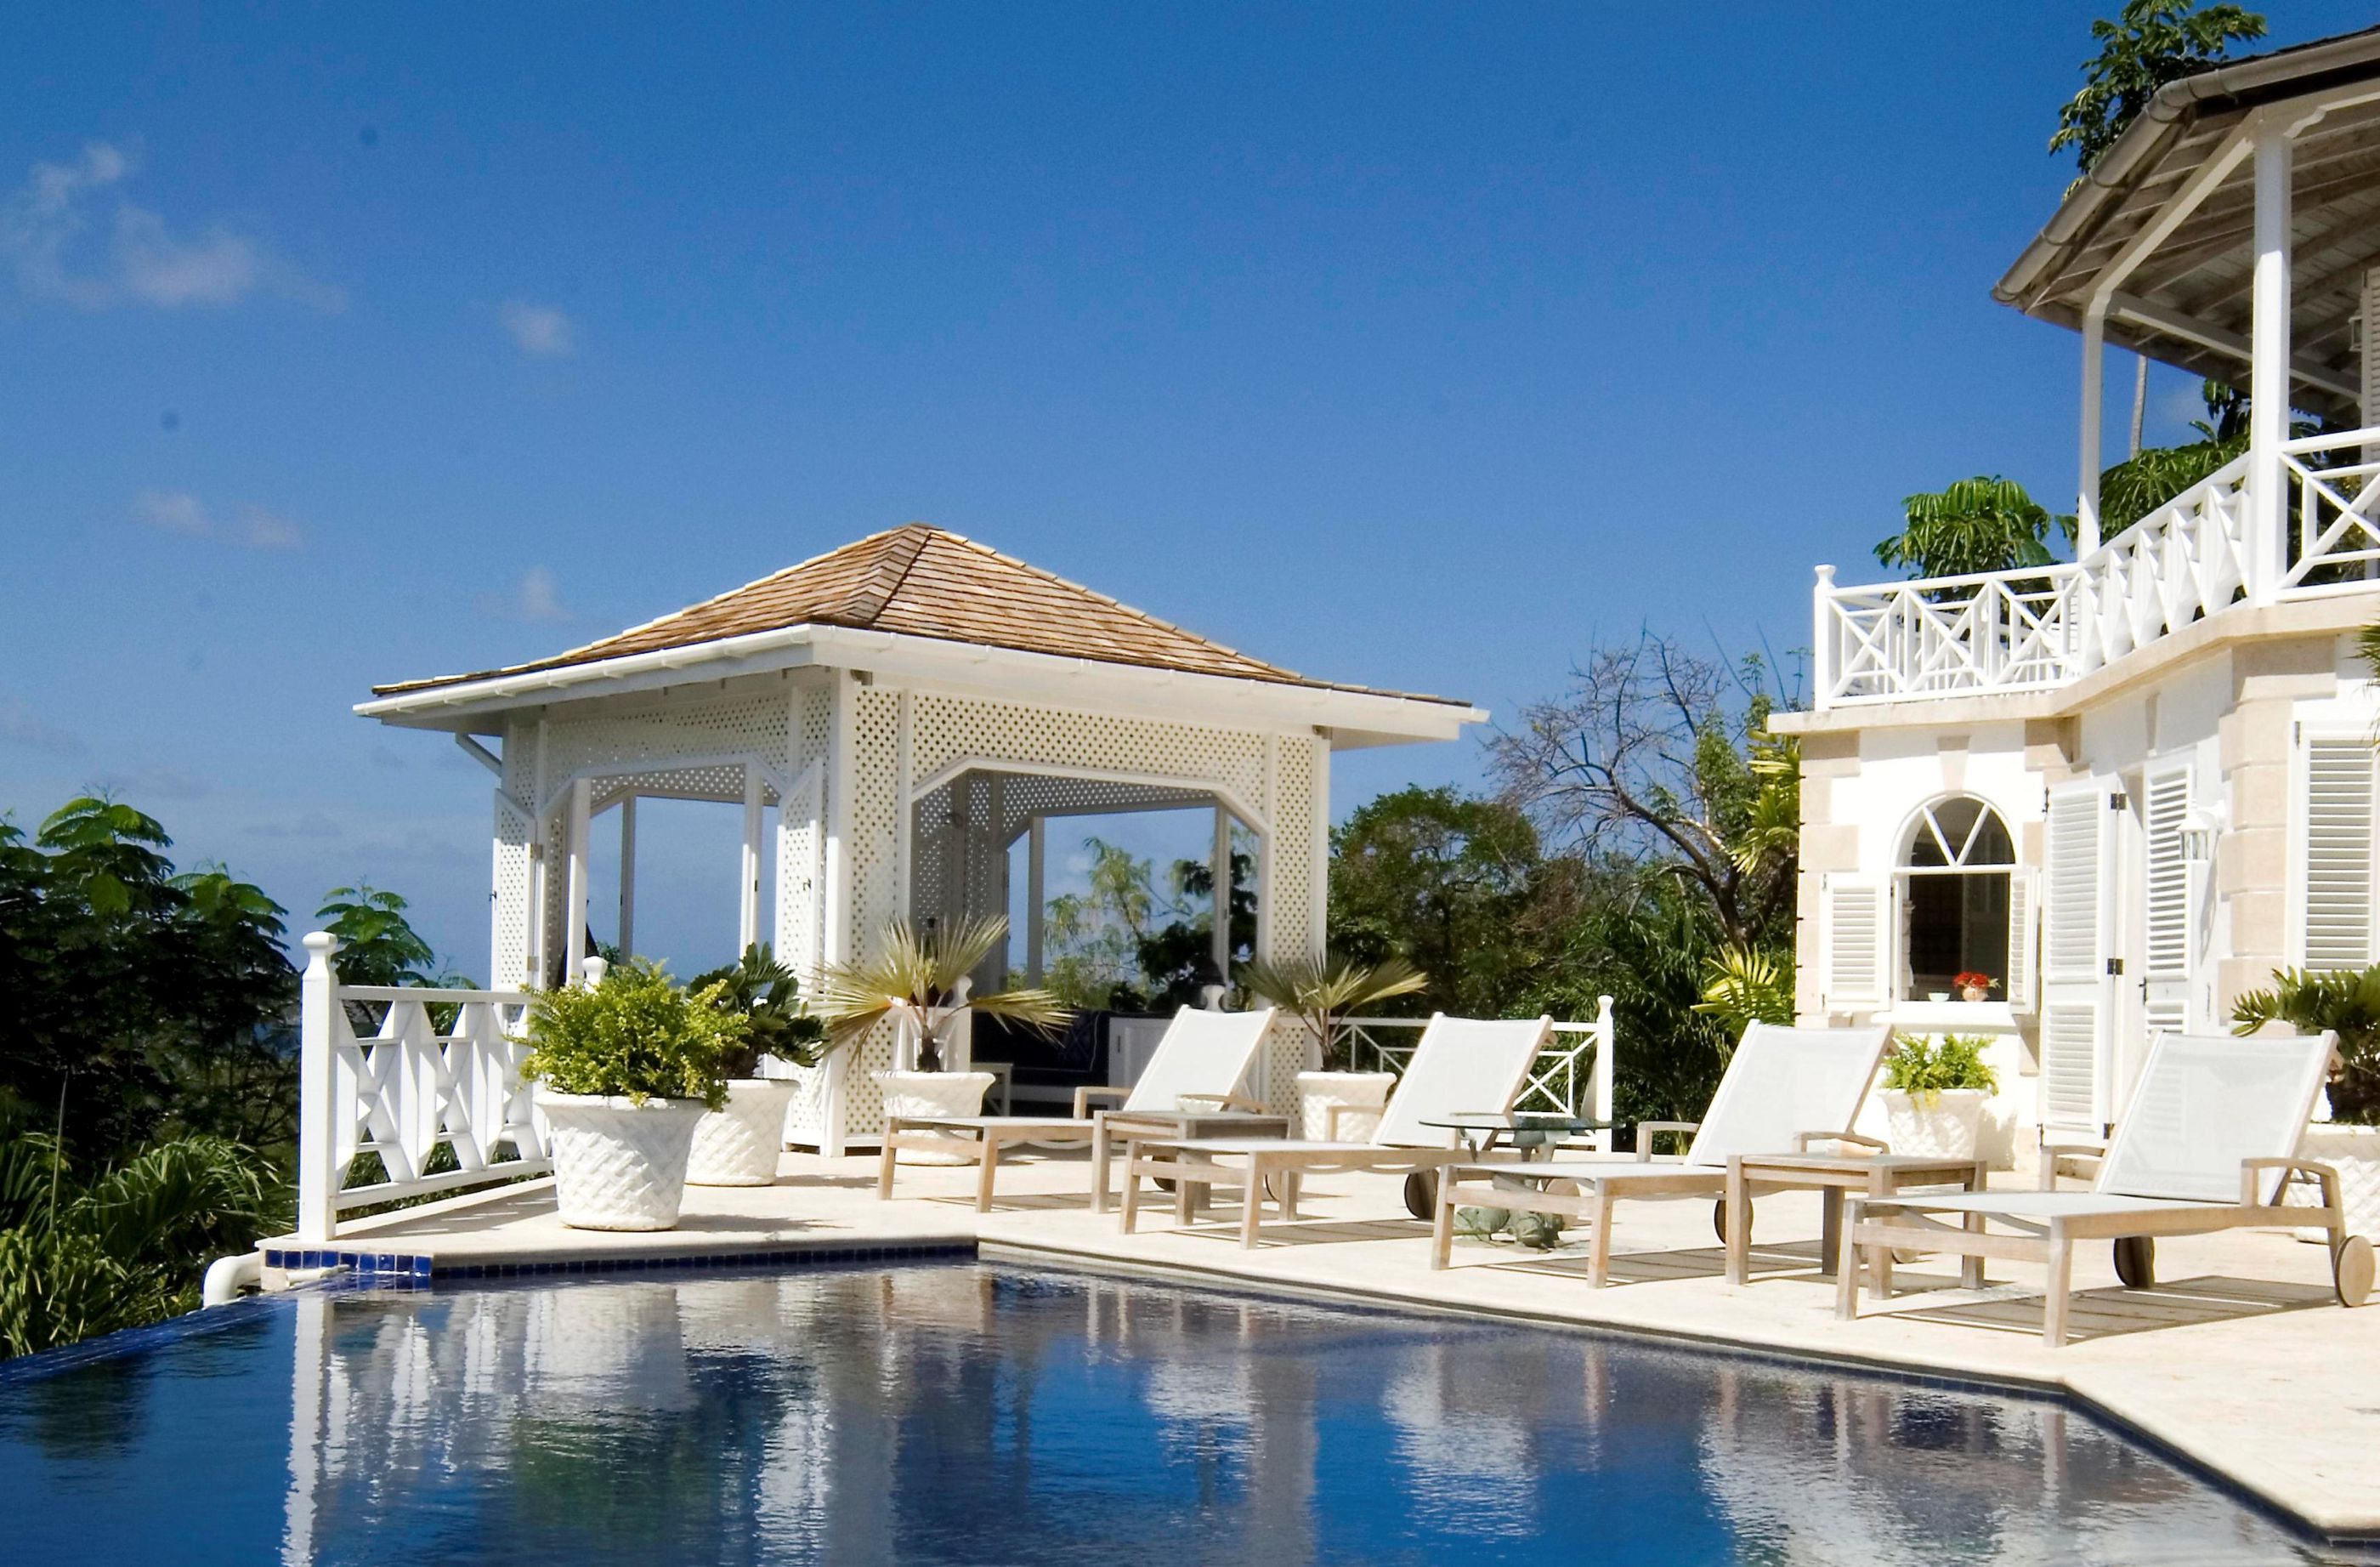 wimming pool and pool house with sun loungers at Callaloo, Mustique